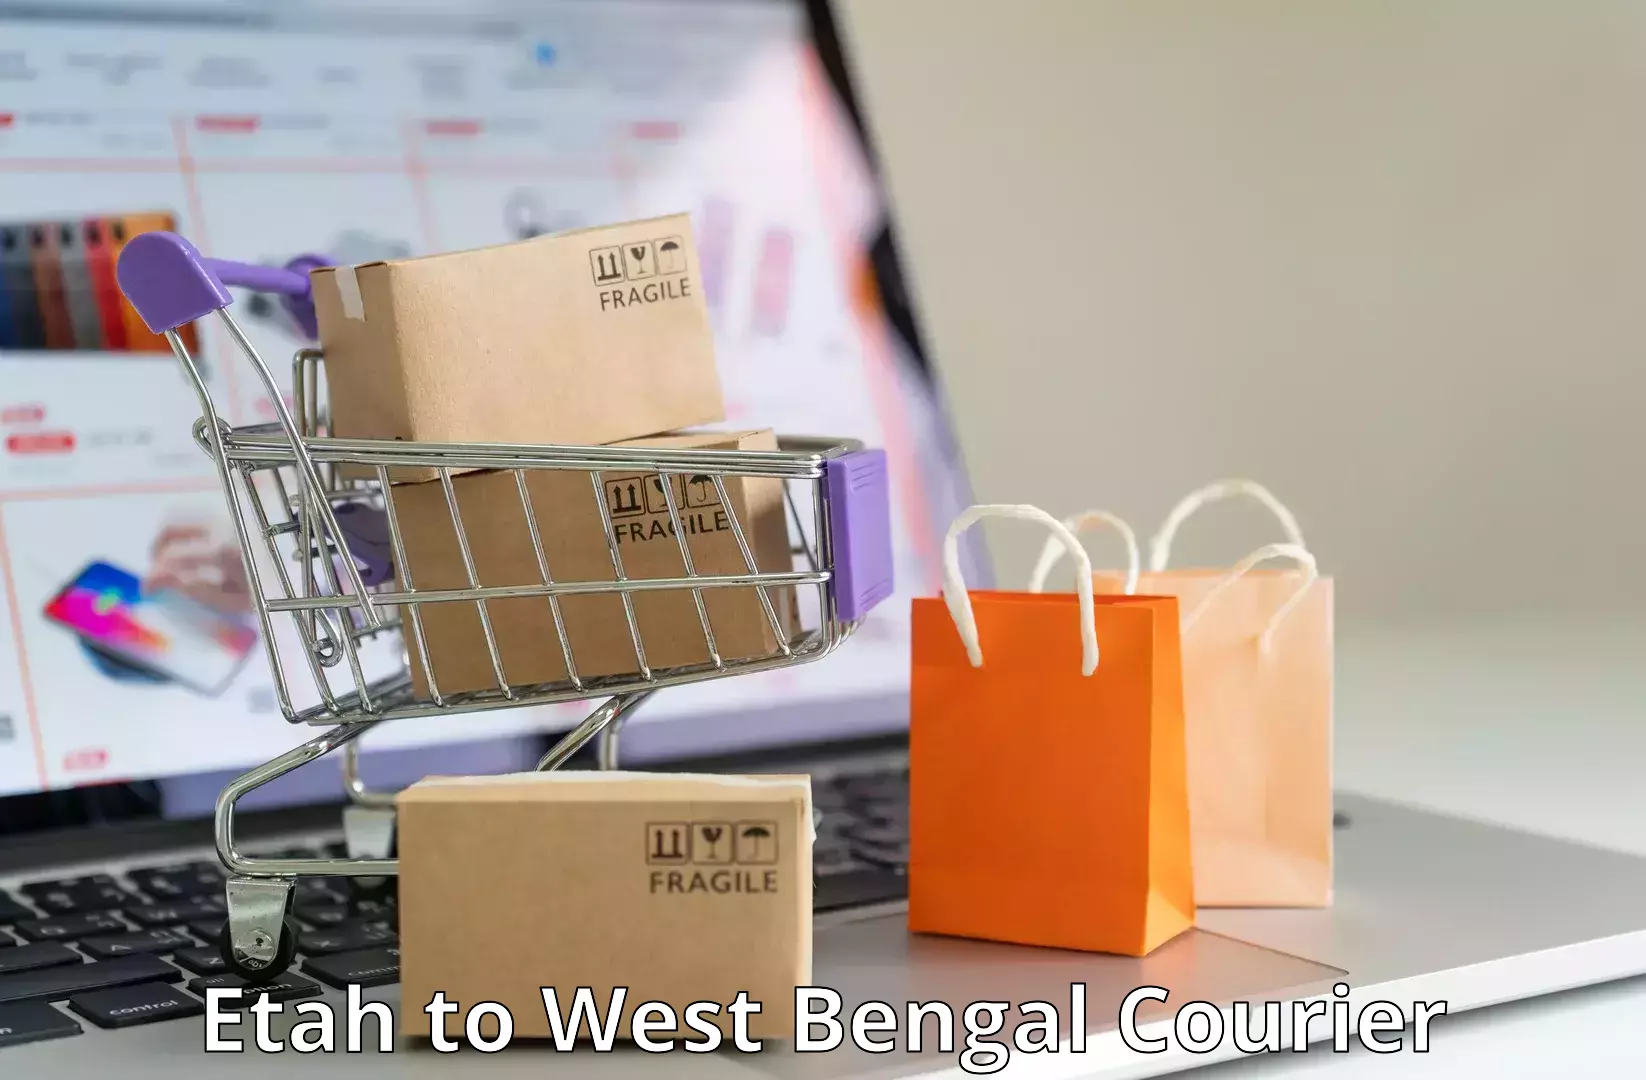 Specialized shipment handling Etah to West Bengal